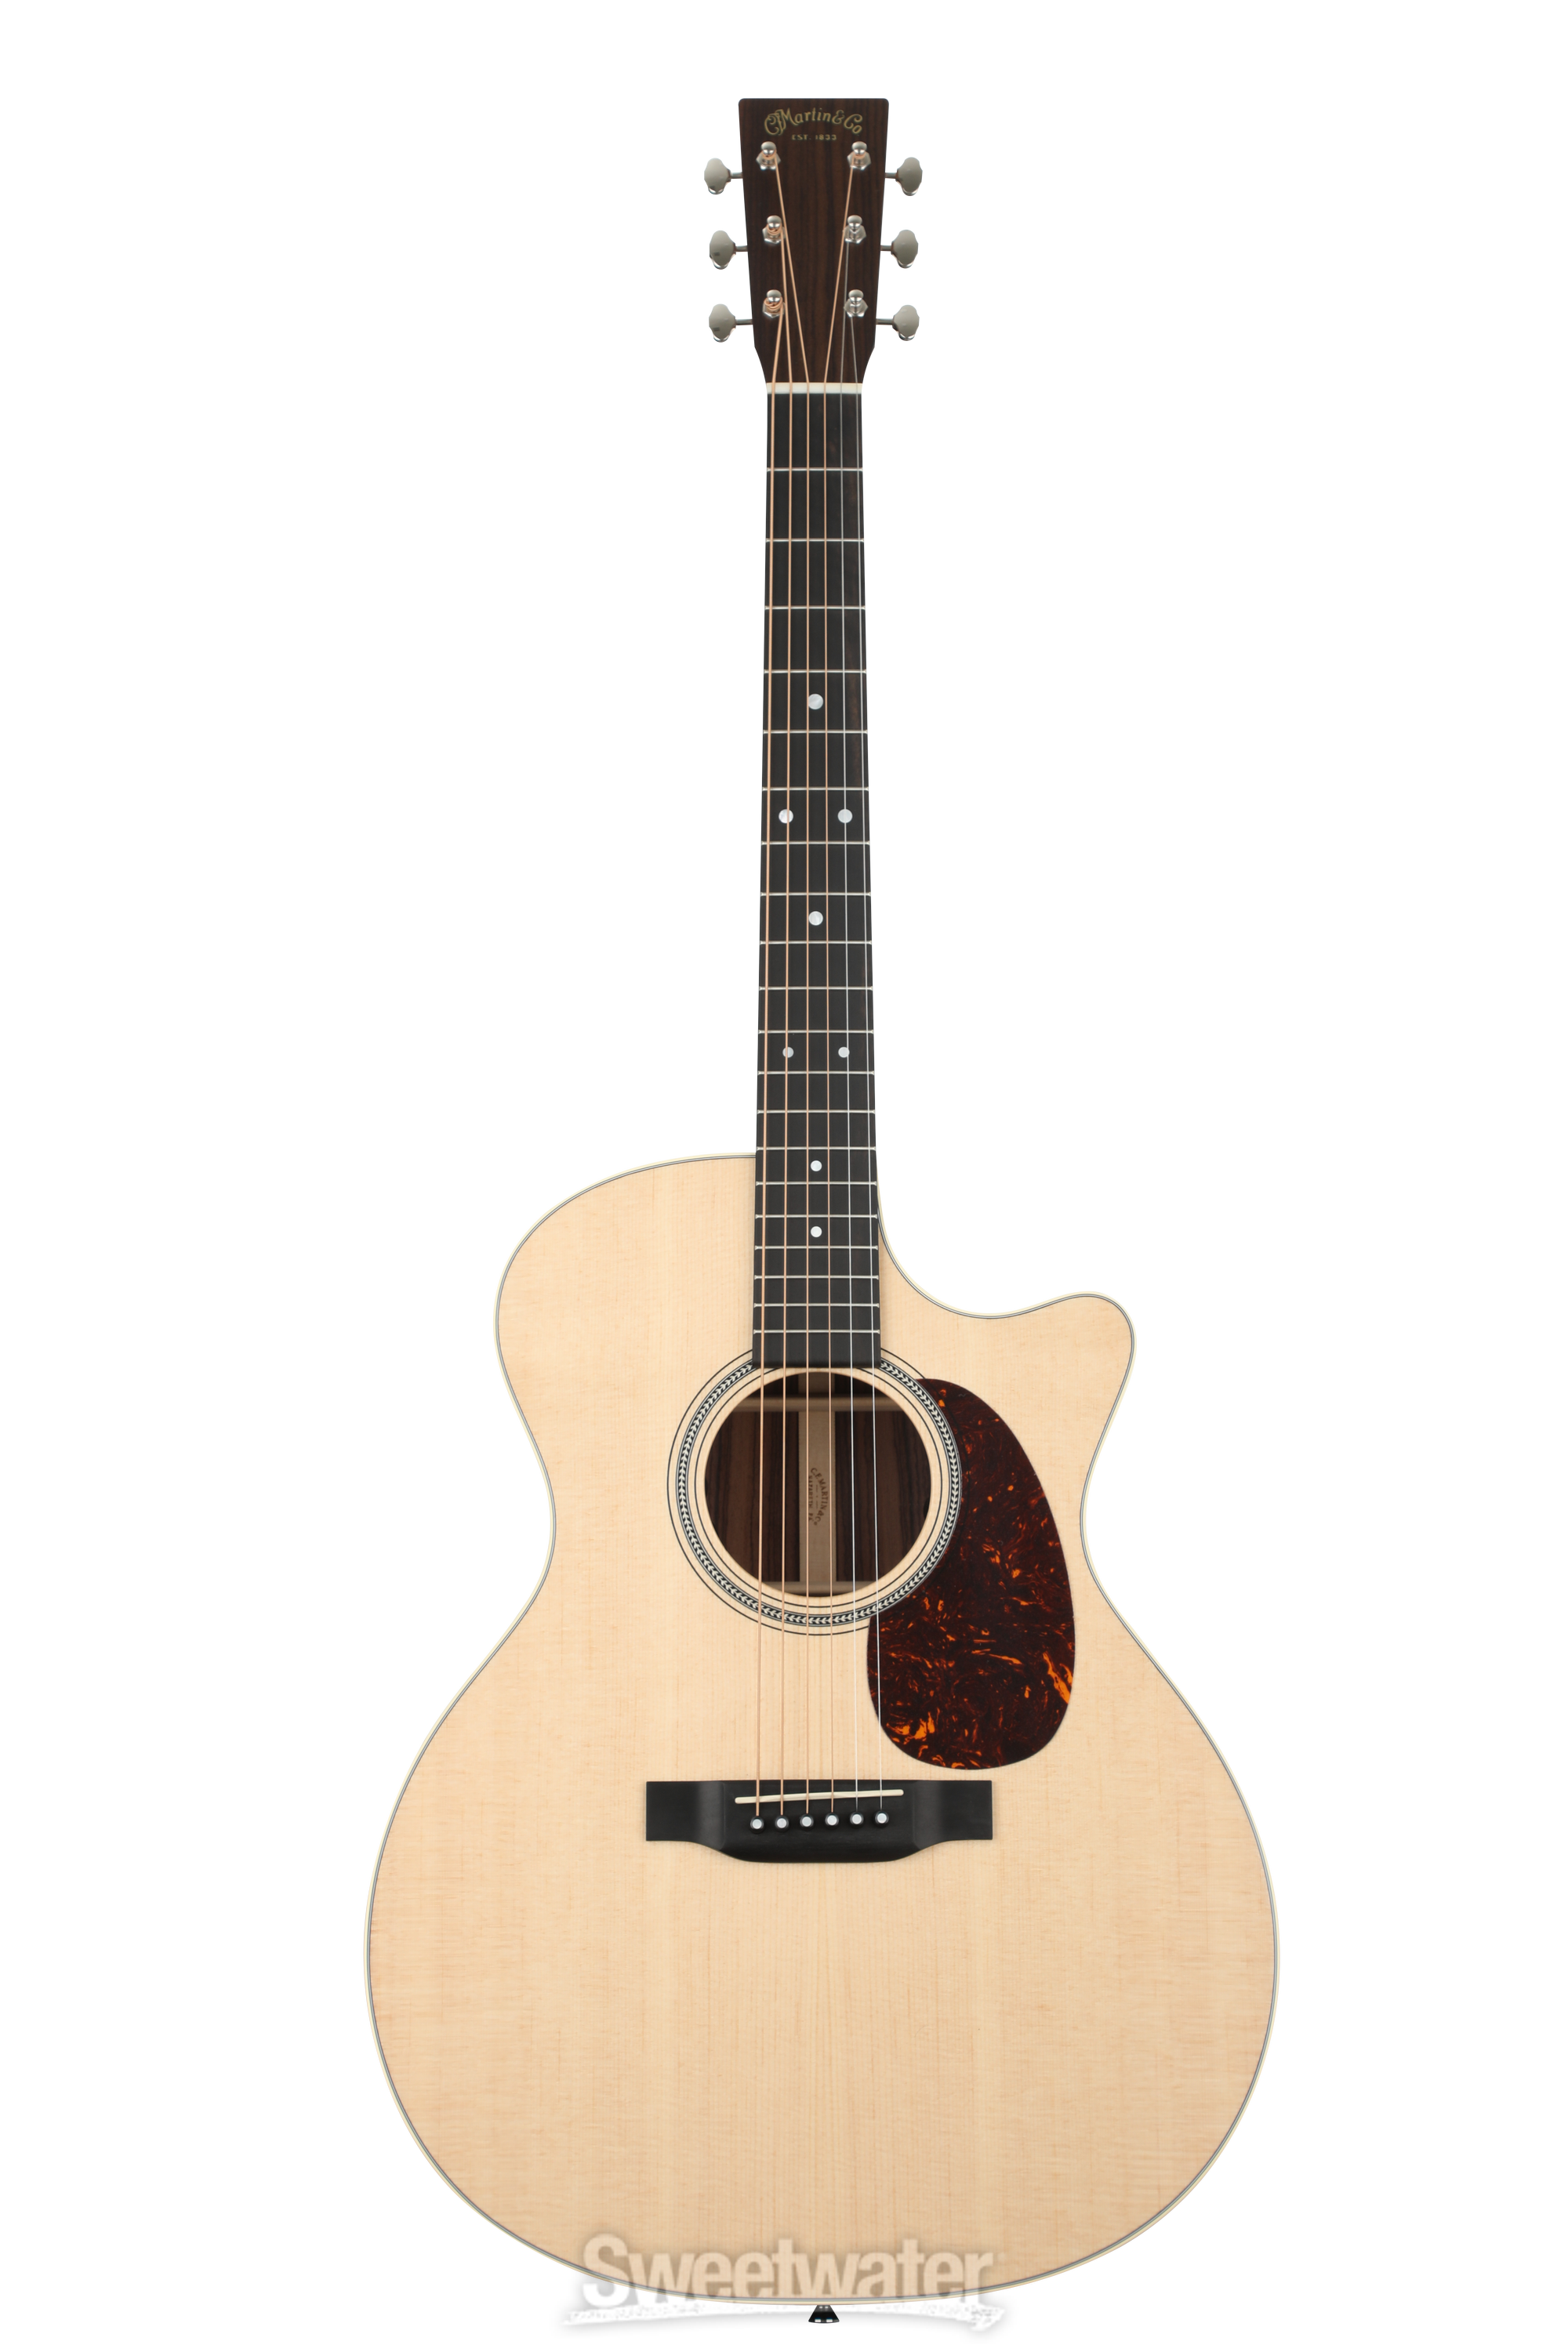 Martin GPC-16E Rosewood Acoustic-electric Guitar - Natural 